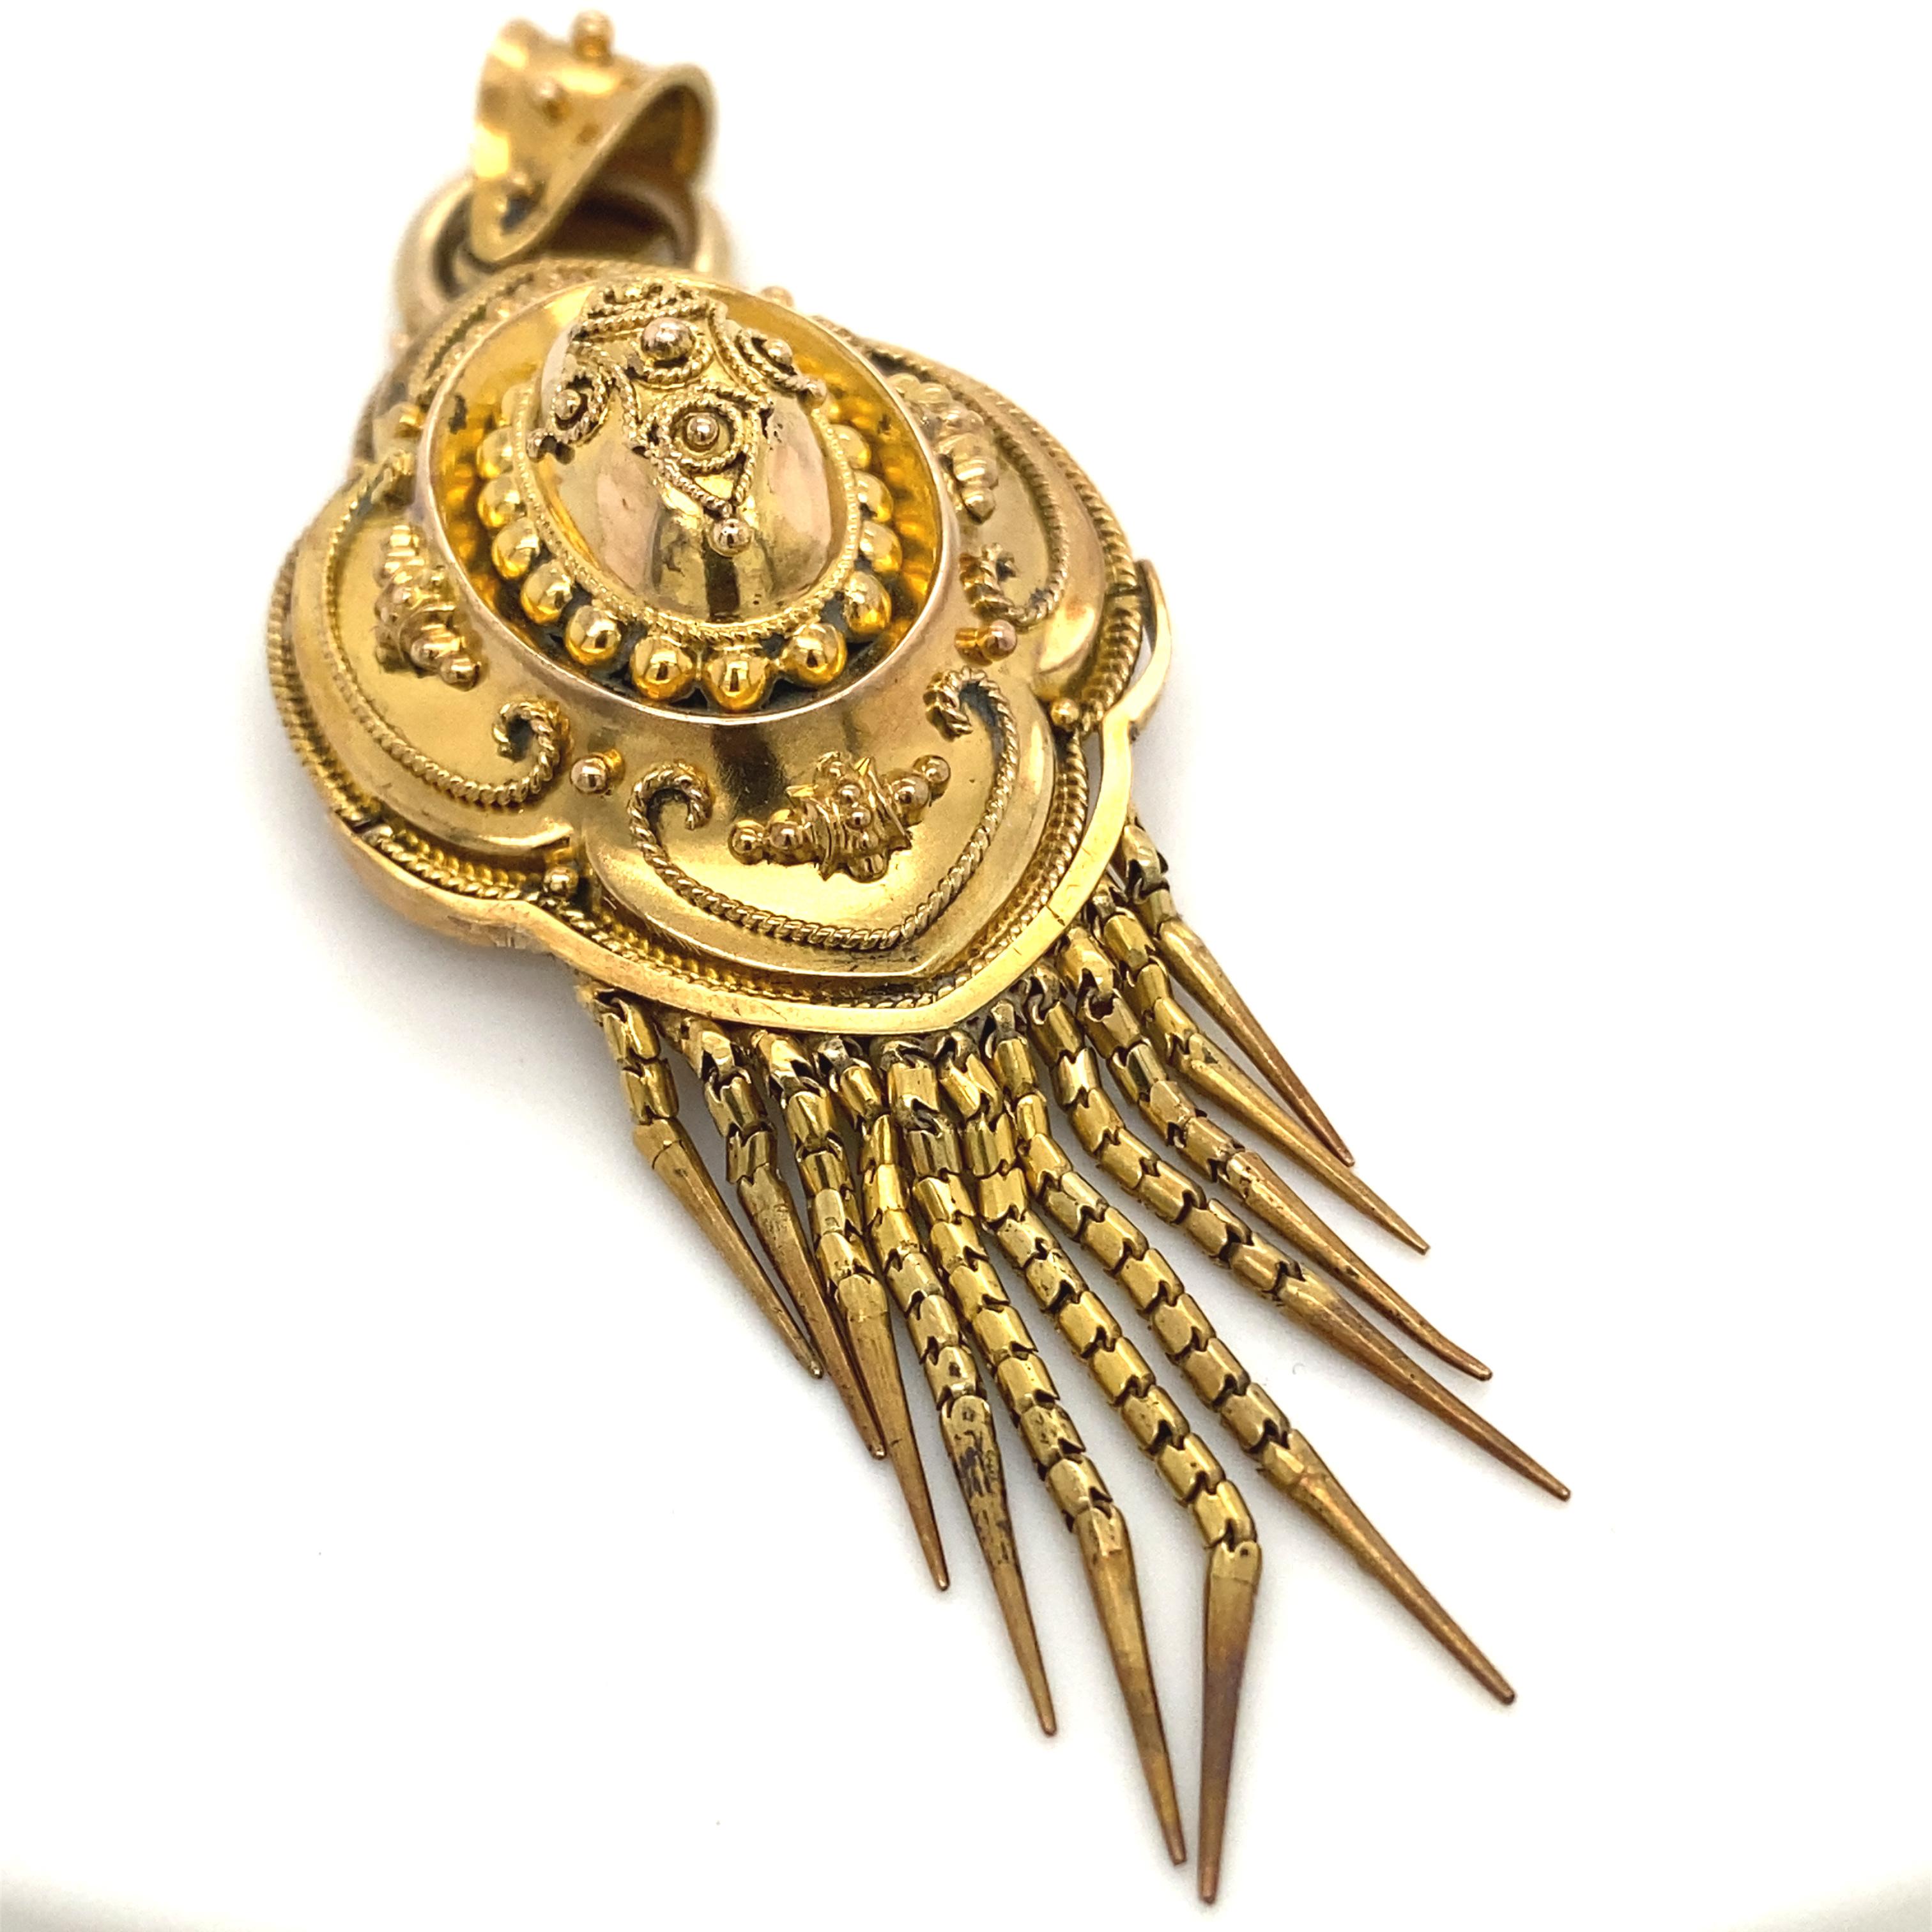 A Victorian pendant in 18 karat yellow gold, circa 1860.

This beautiful Victorian pendant crafted in yellow gold features exquisite granulation and beadwork throughout, with further bead work on the tapered bale.

The back of the pendant has an